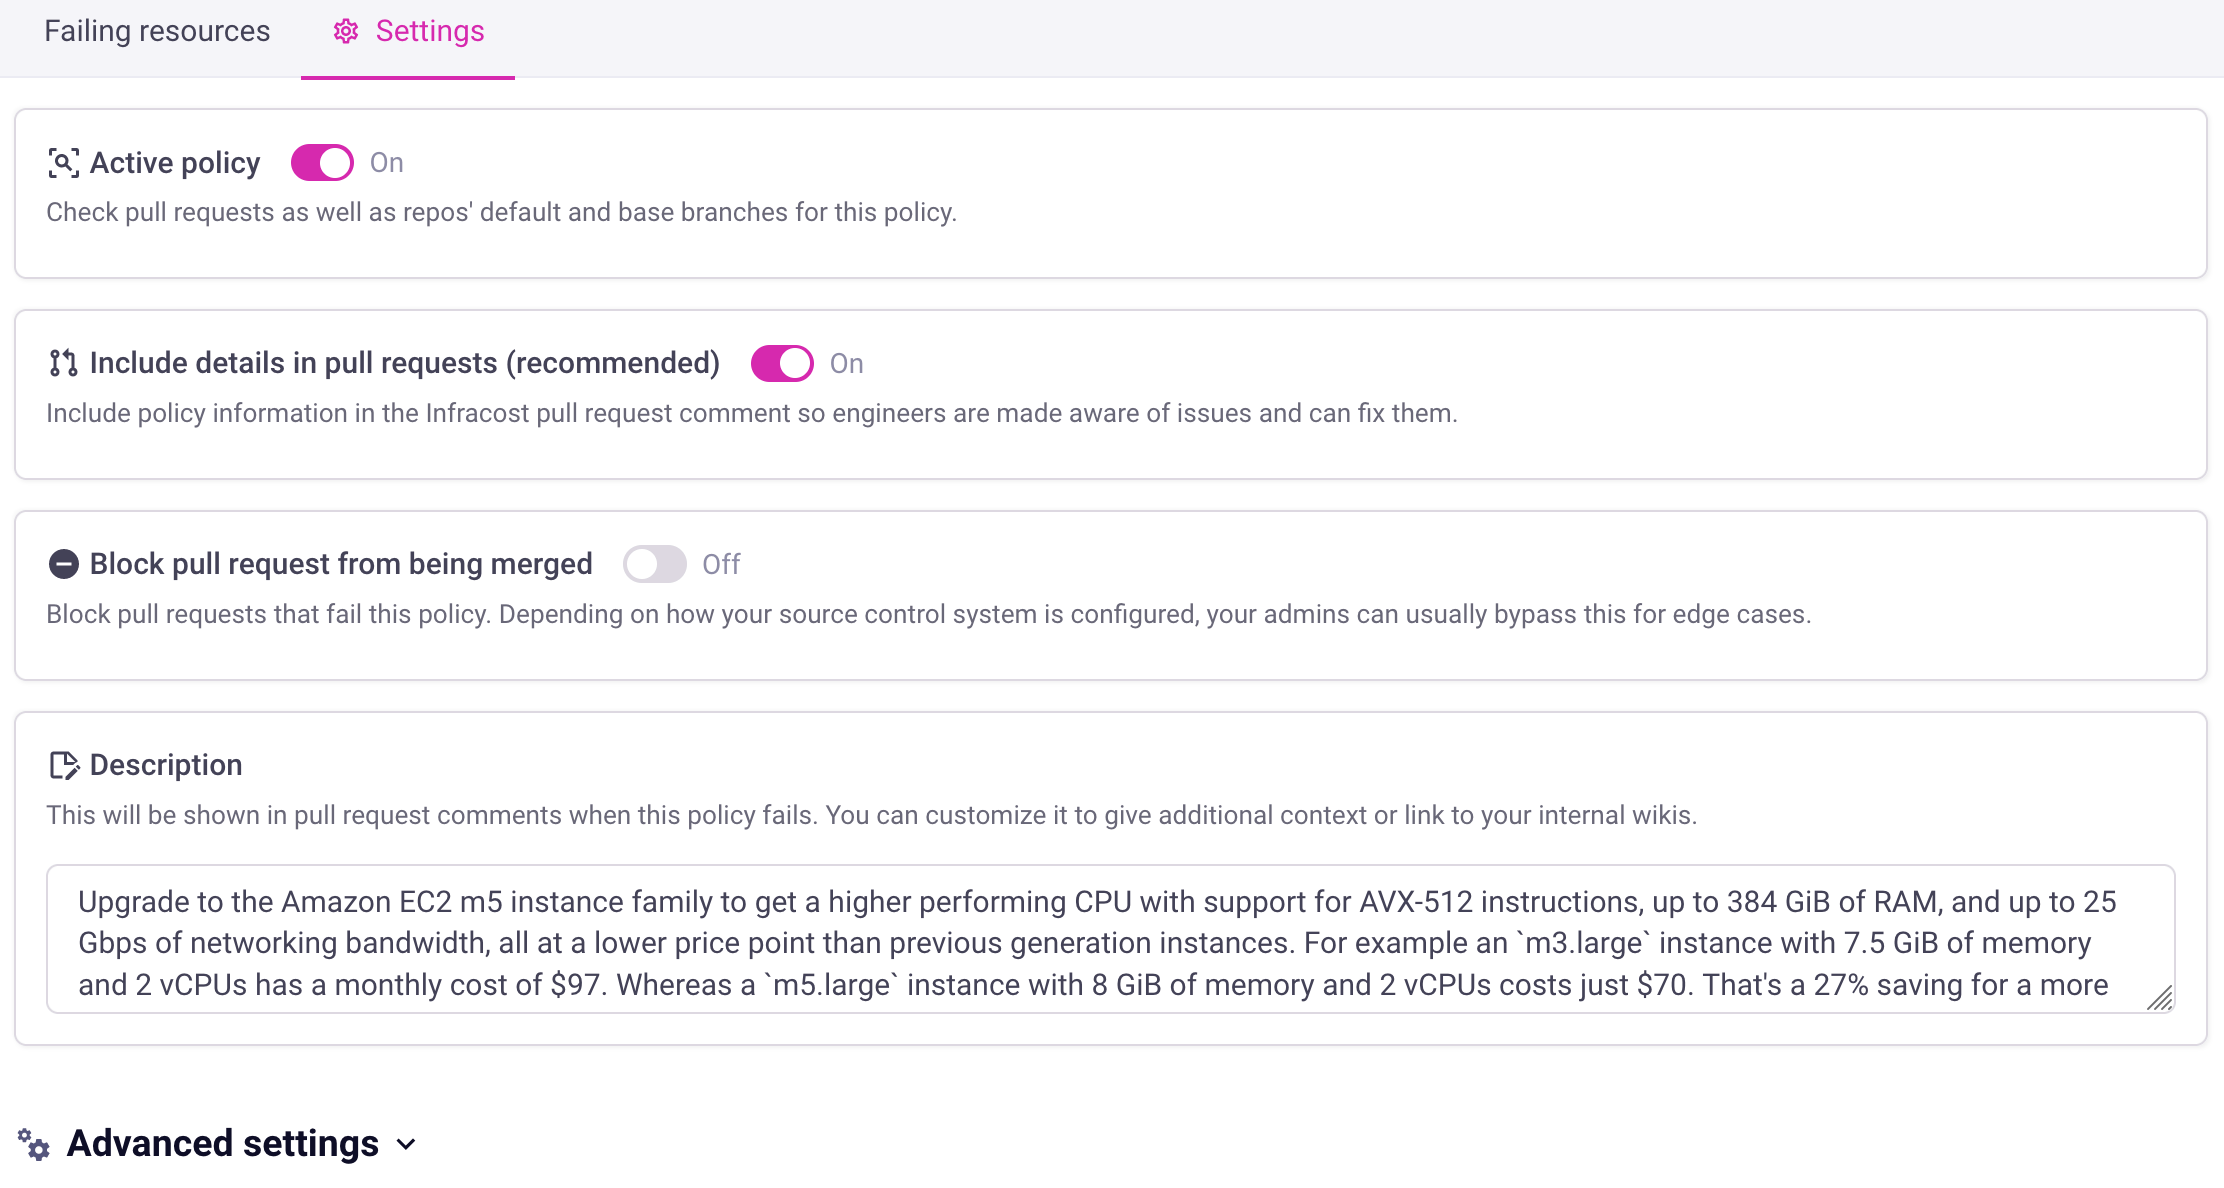 Each policy has settings that can be updated to enforce it in pull requests or customize the message shown in the pull request.